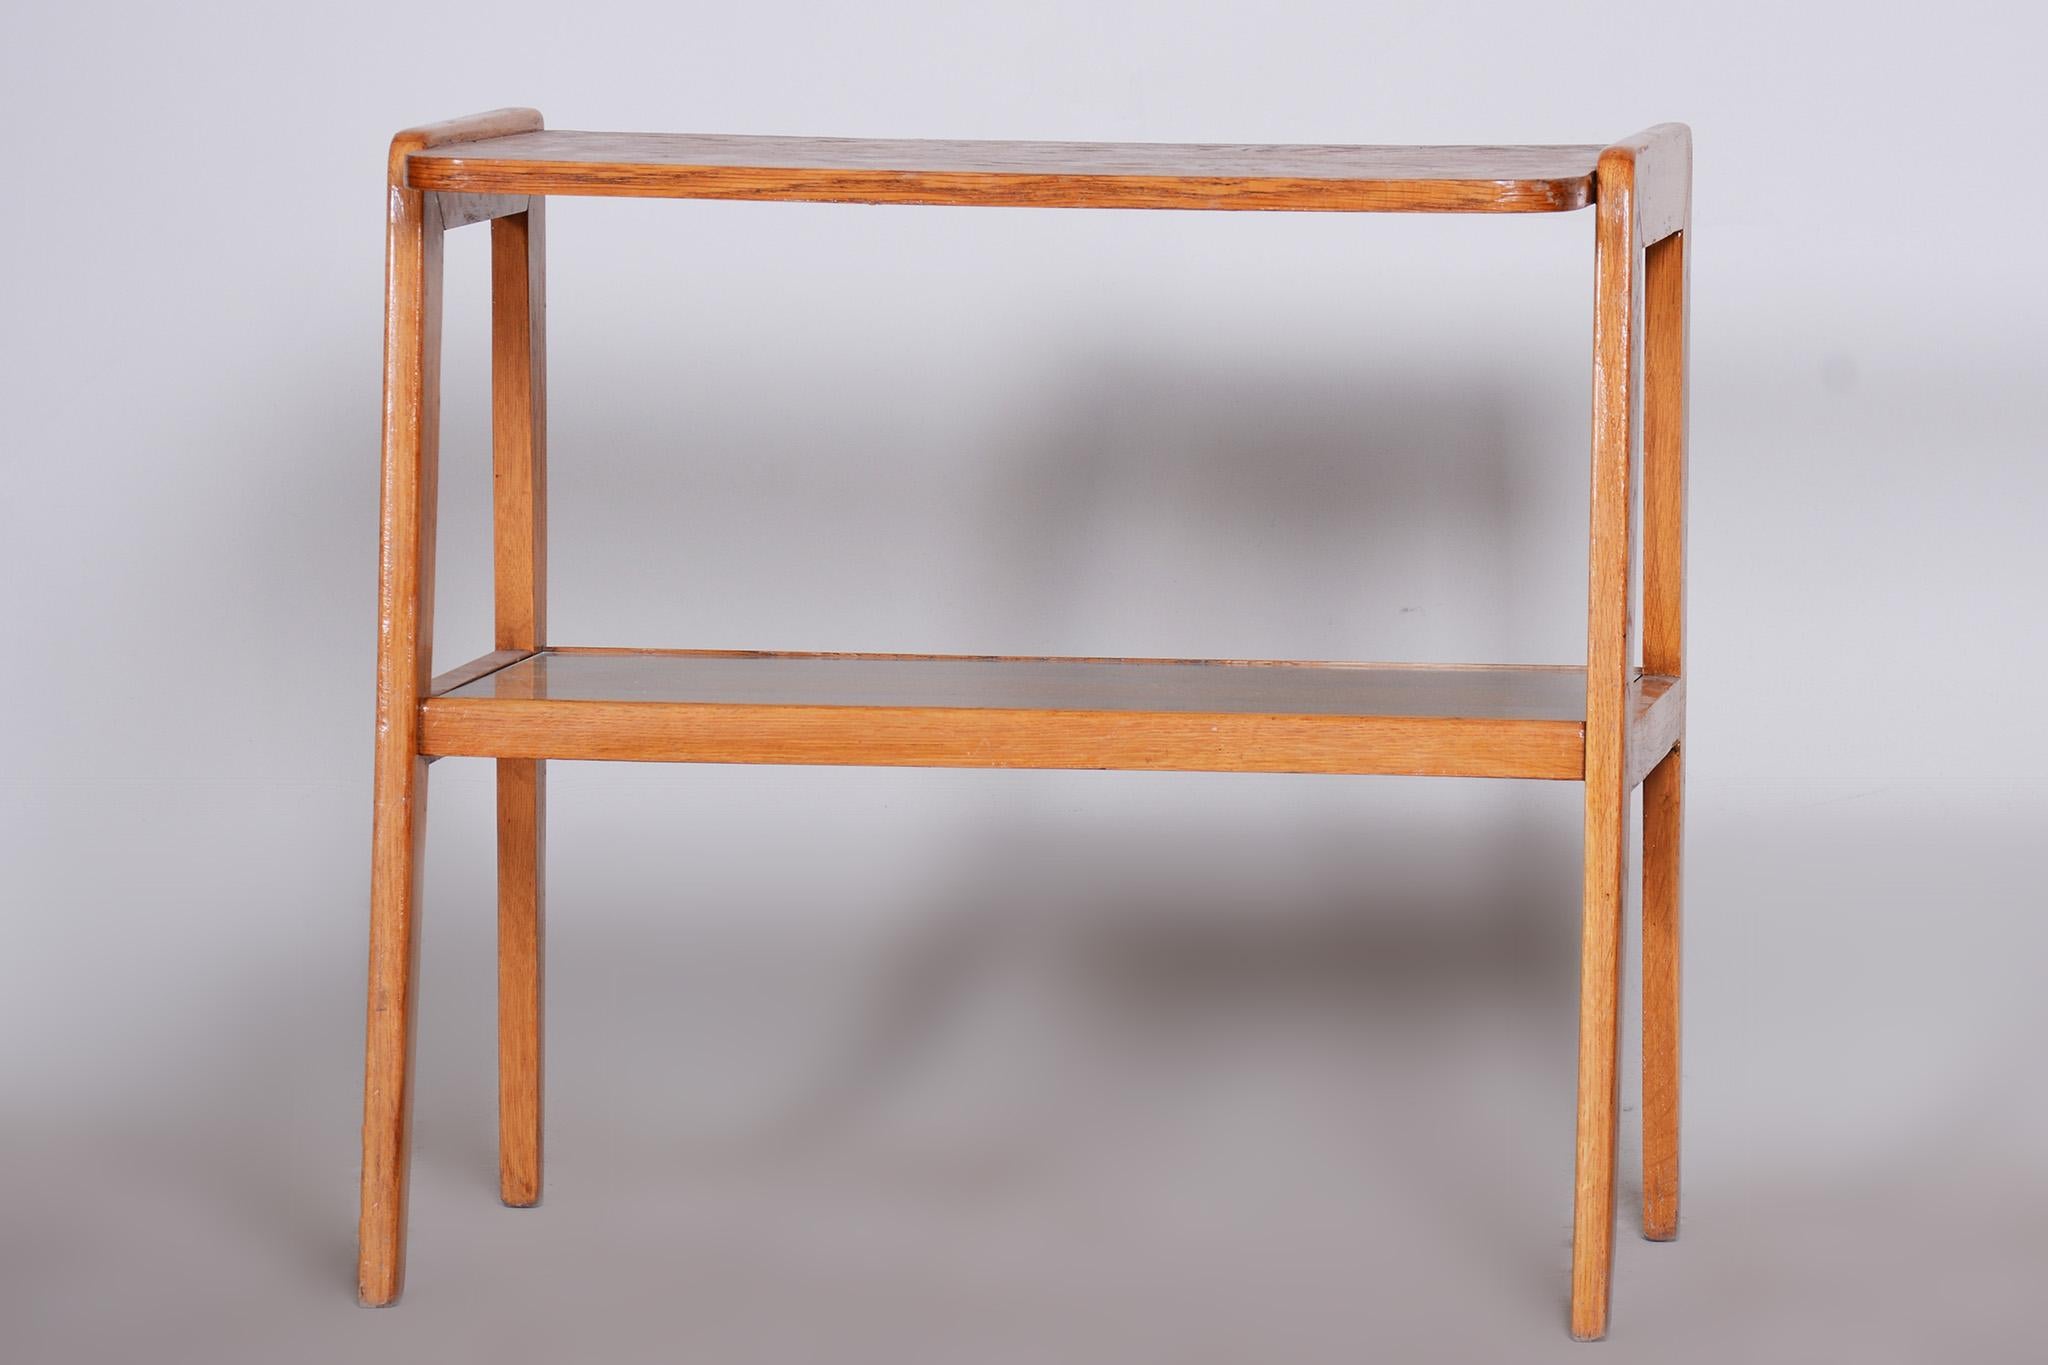 Restored Bauhaus console table. Refreshed polish.

Source: Czechia
Period: 1950-1959
Material: Oak and glass.